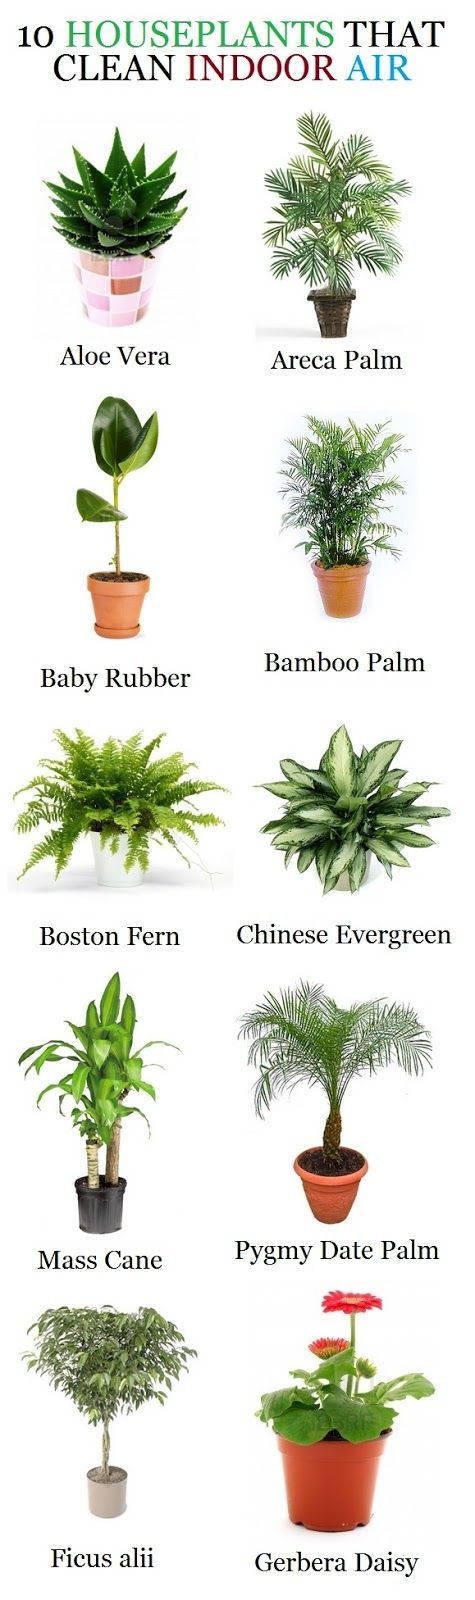 Plants that clean indoor air